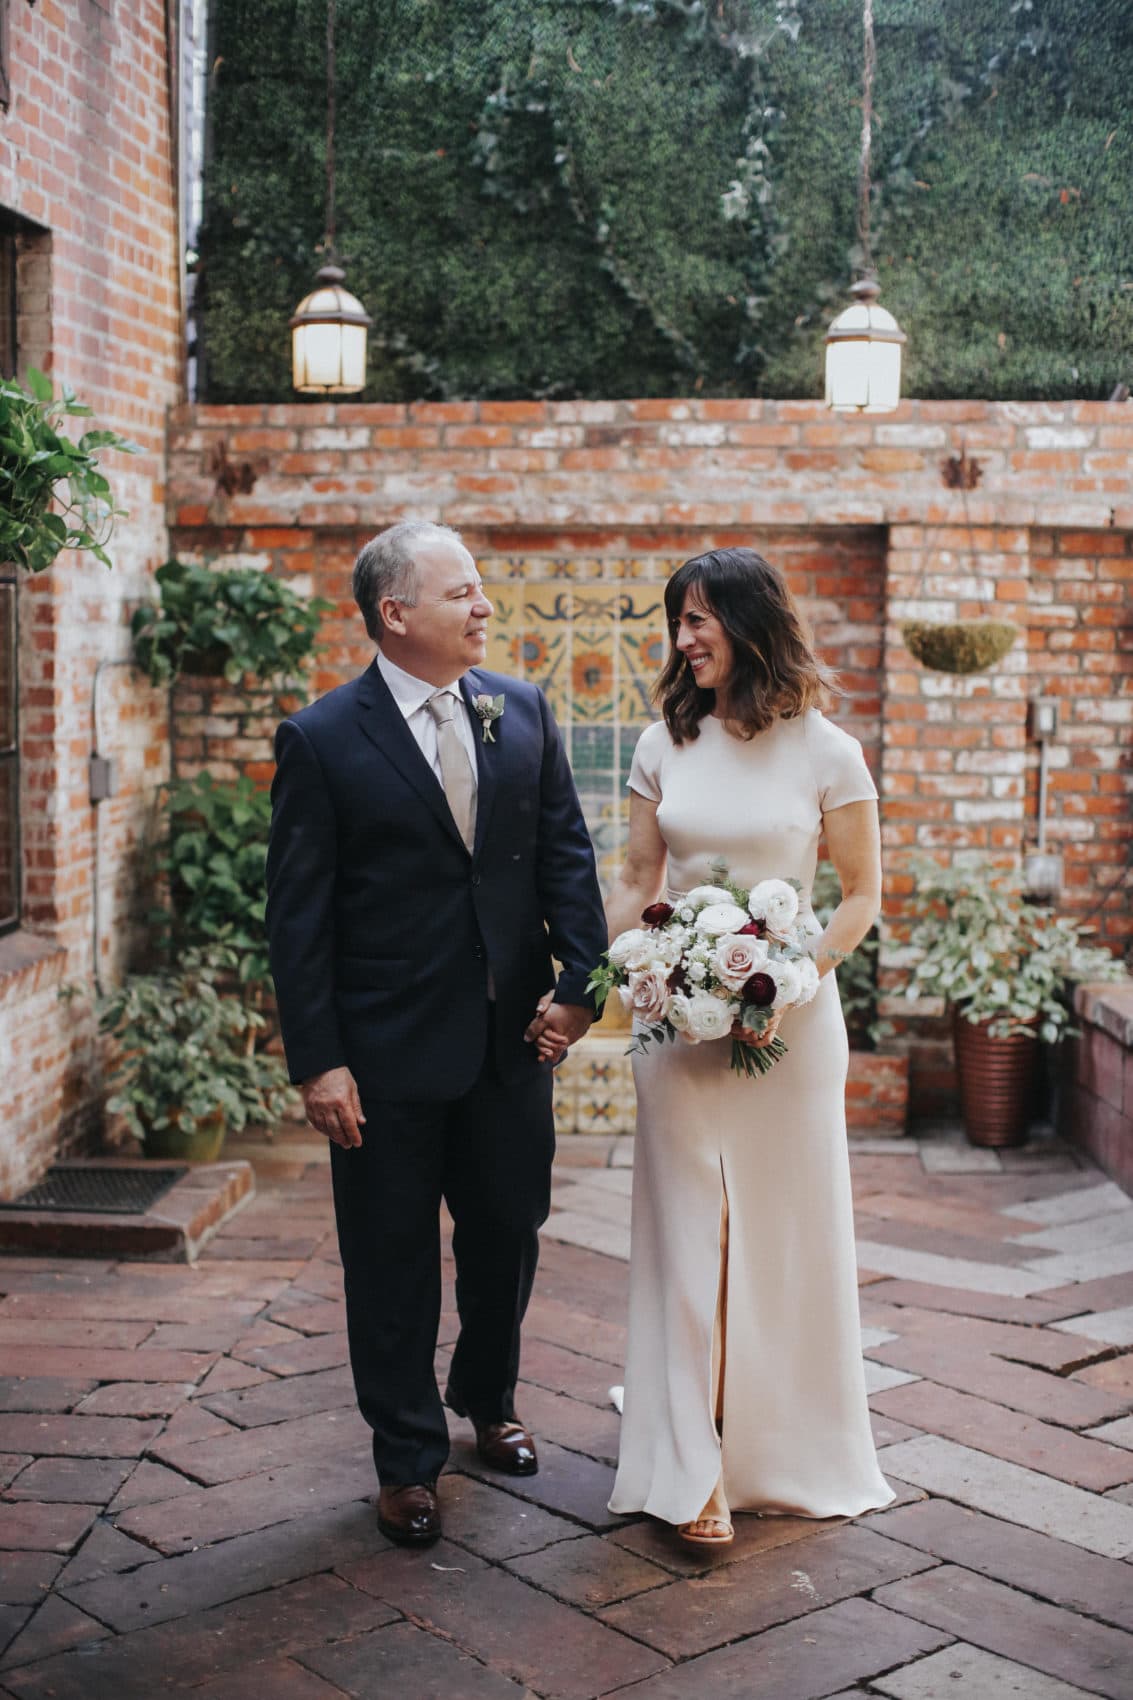 Laurie and Jonathan at their wedding, October 2018 (Credit: Jenny Smith &amp; Co.)